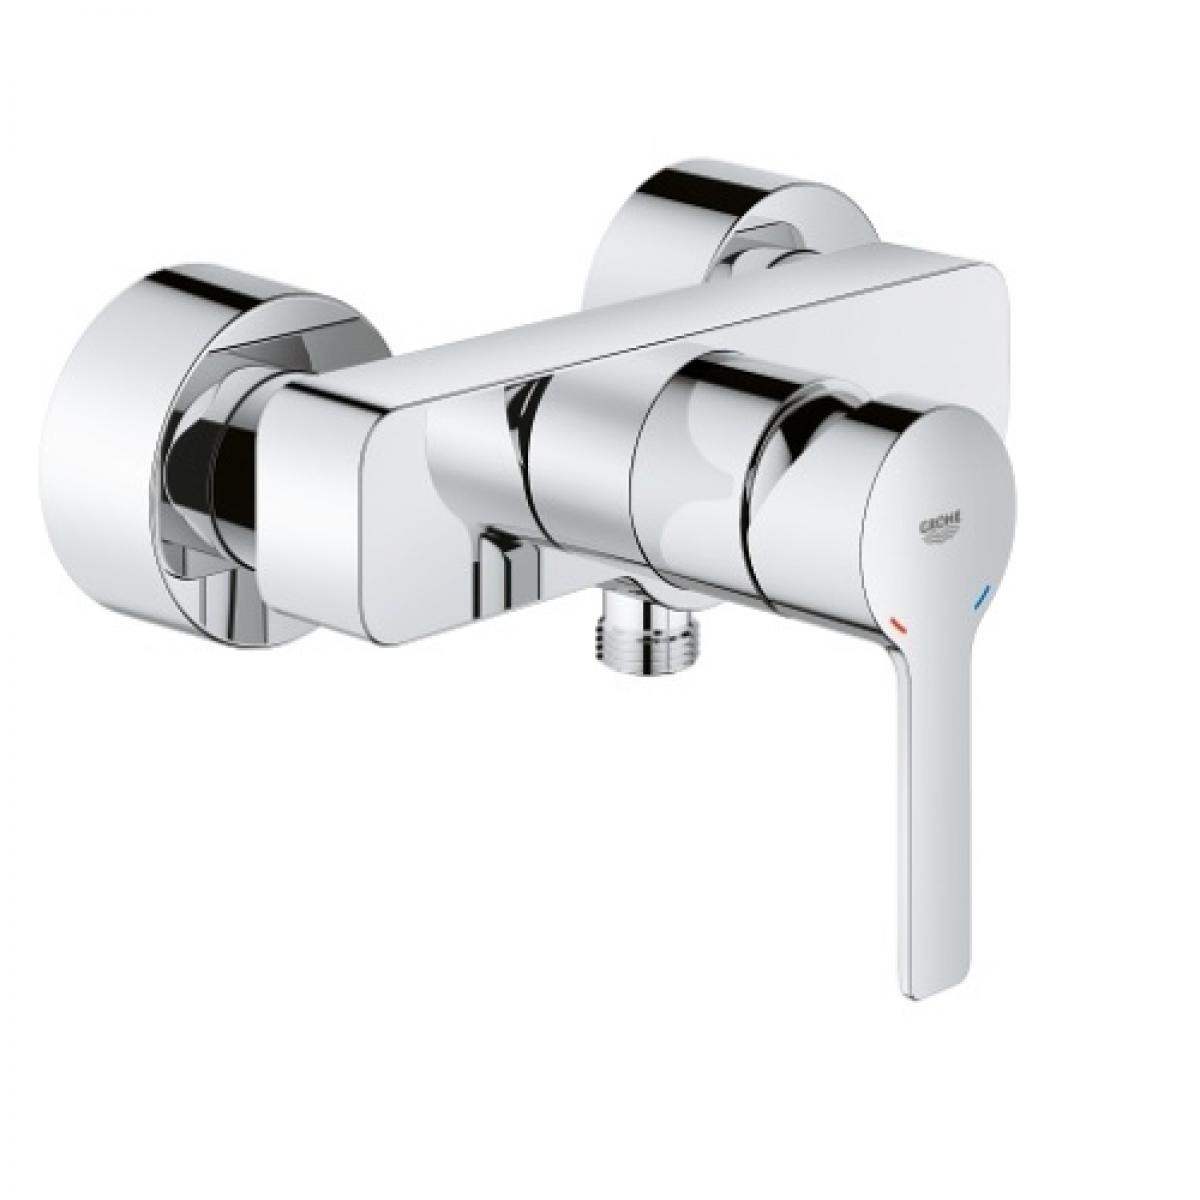 Grohe - GROHE - Mitigeur douche mural Lineare - Mitigeur douche